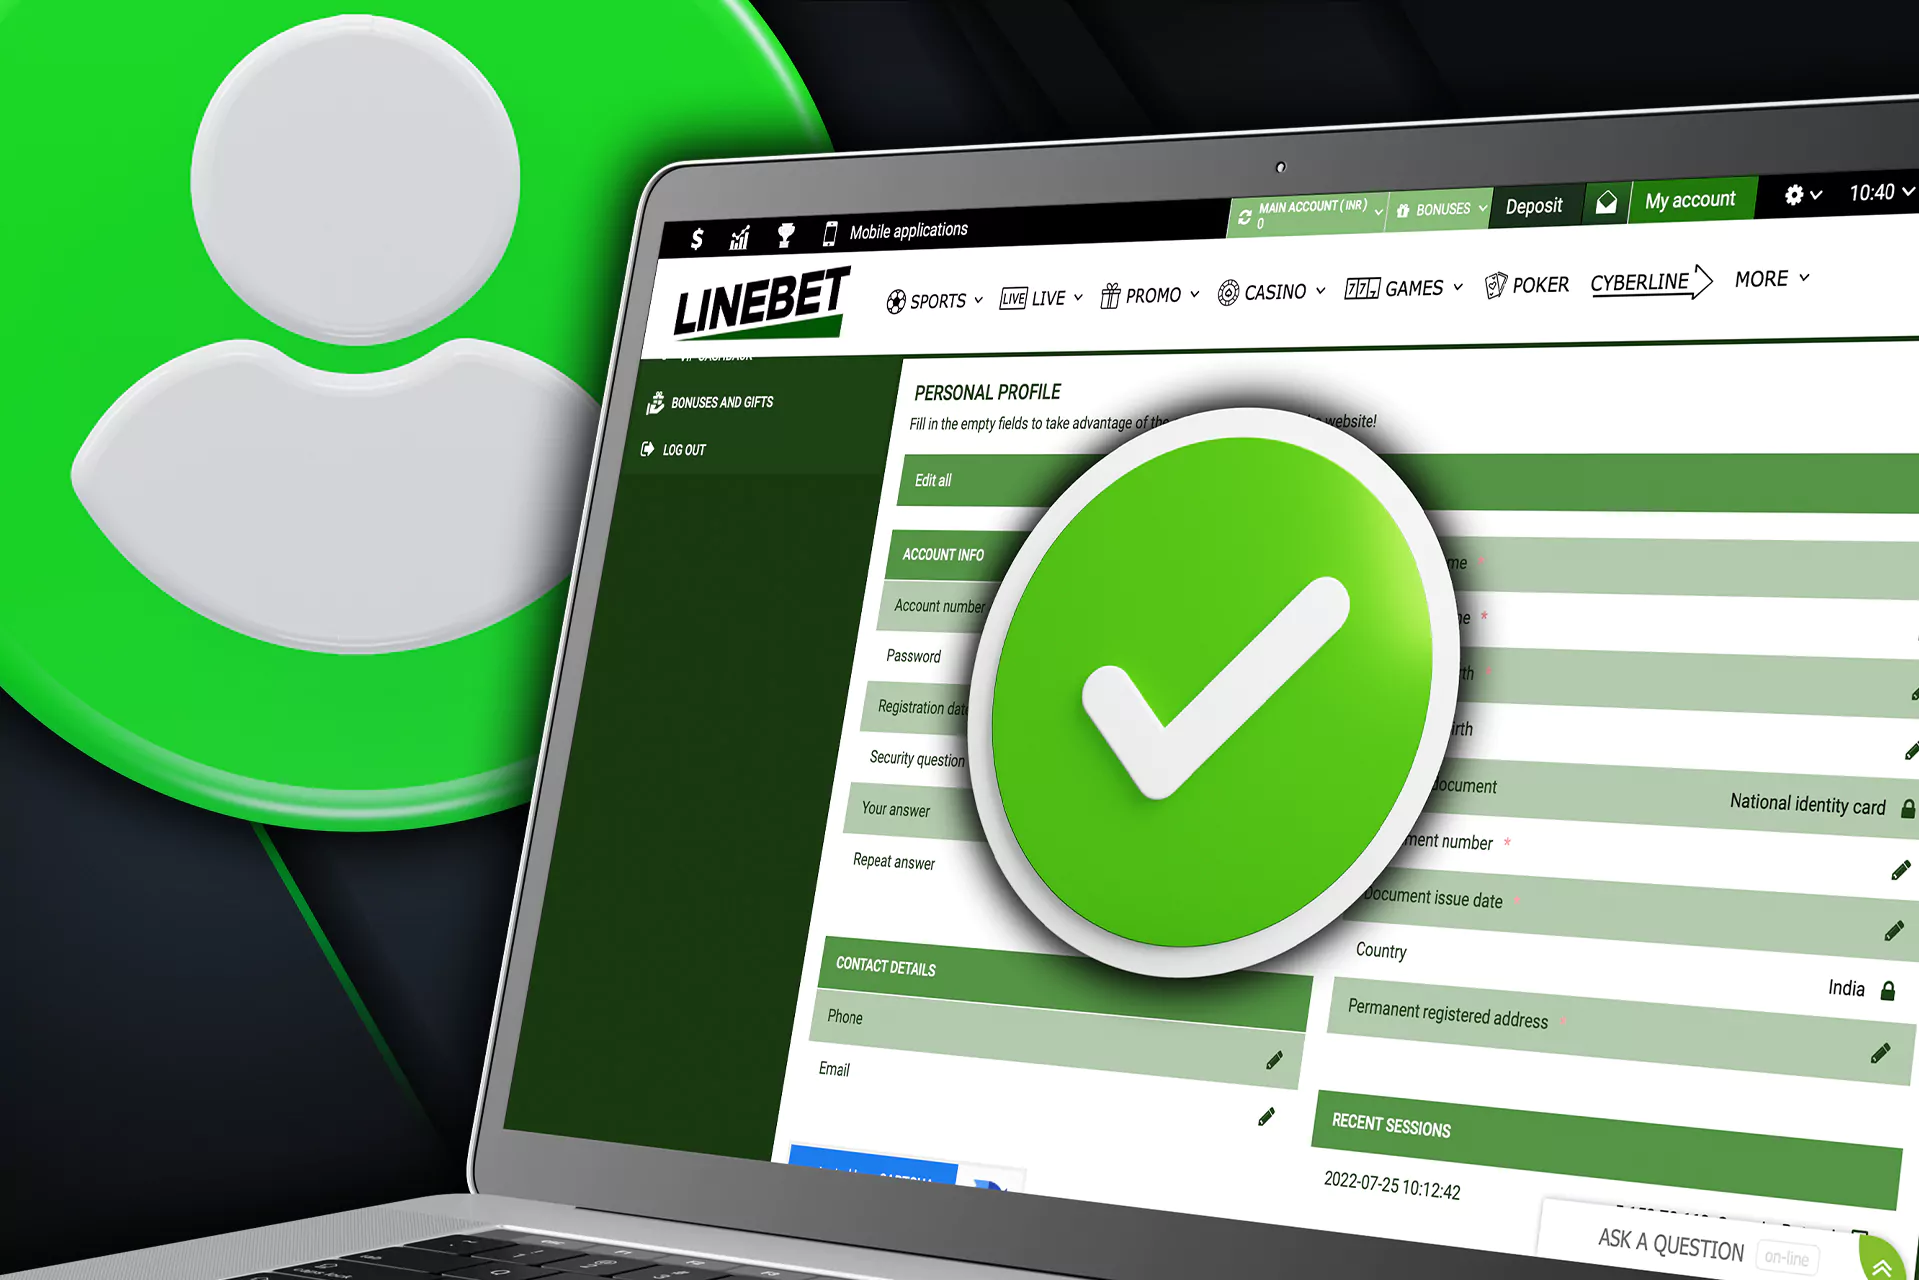 Verify your Linebet account to be protected by Linebet and withdraw winnings safely.